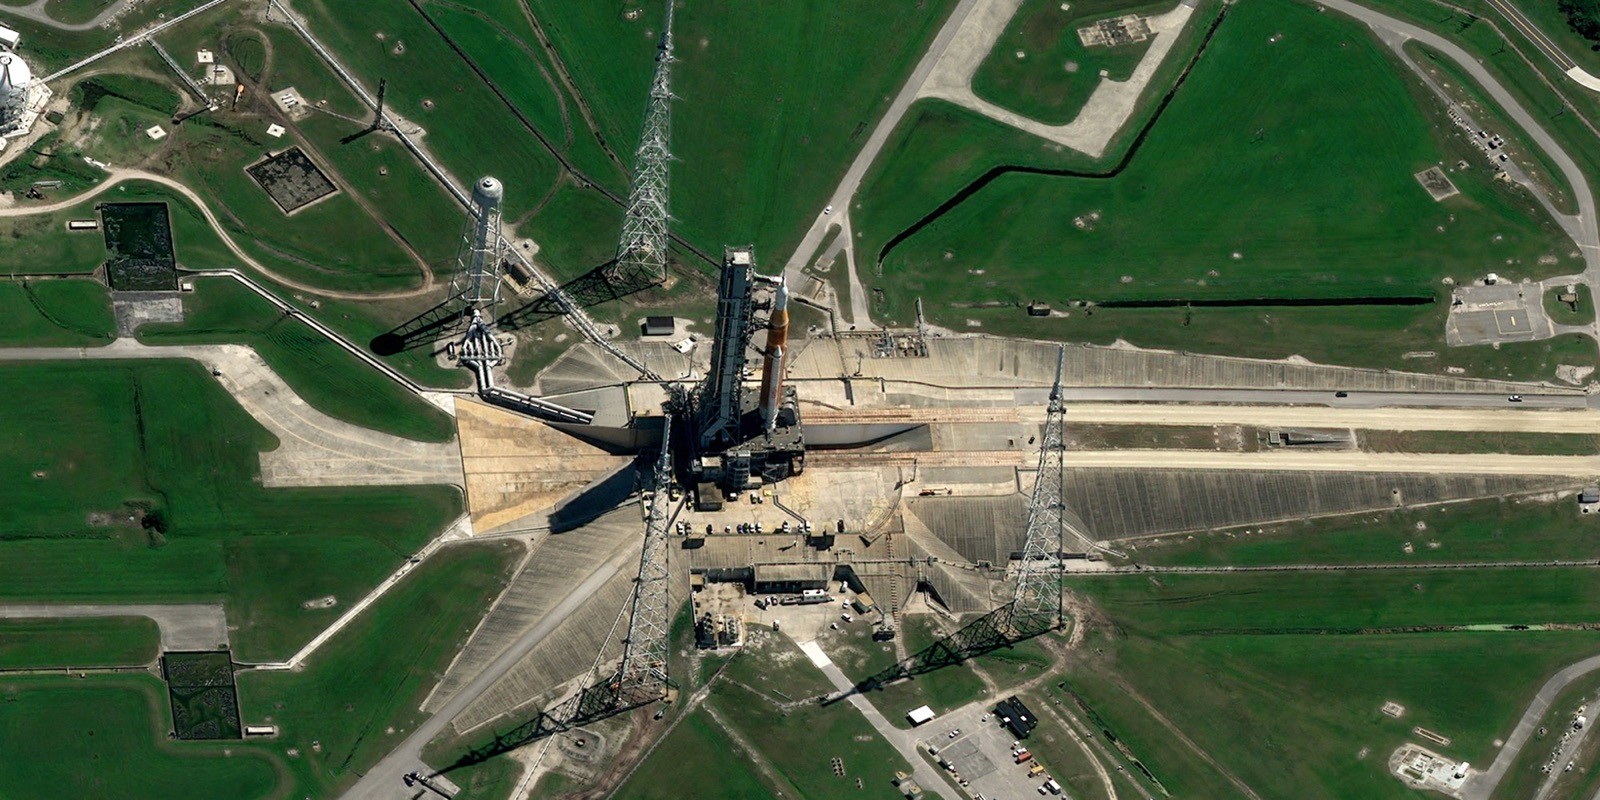 NASA's Artemis 1 mission, stacked at the launch pad ready for testing, as seen from space by the Pléiades Neo satellite, operated by the European aerospace company Airbus.